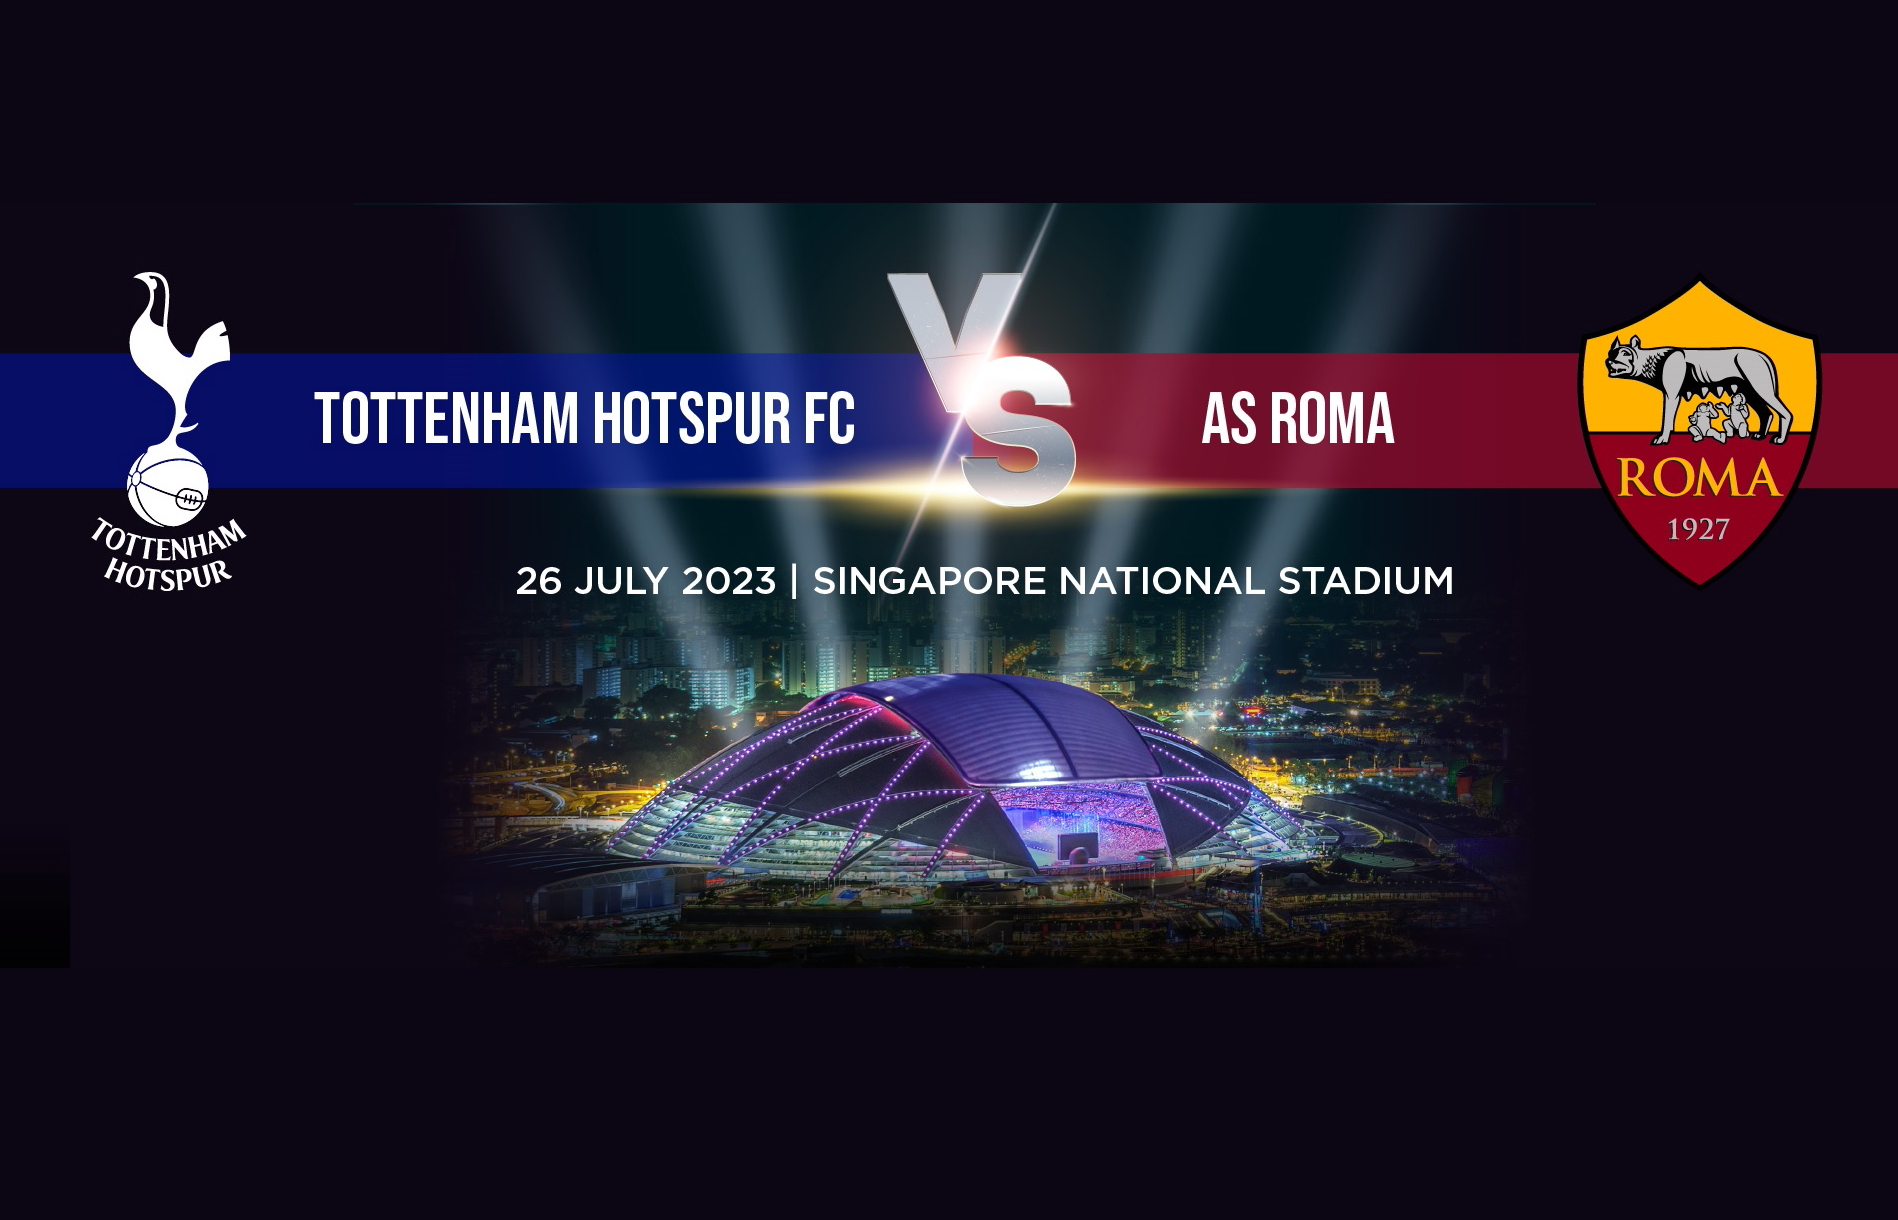 Tottenham Hotspur will play AS Roma in Singapore on 26 July 2023. Click to enlarge.